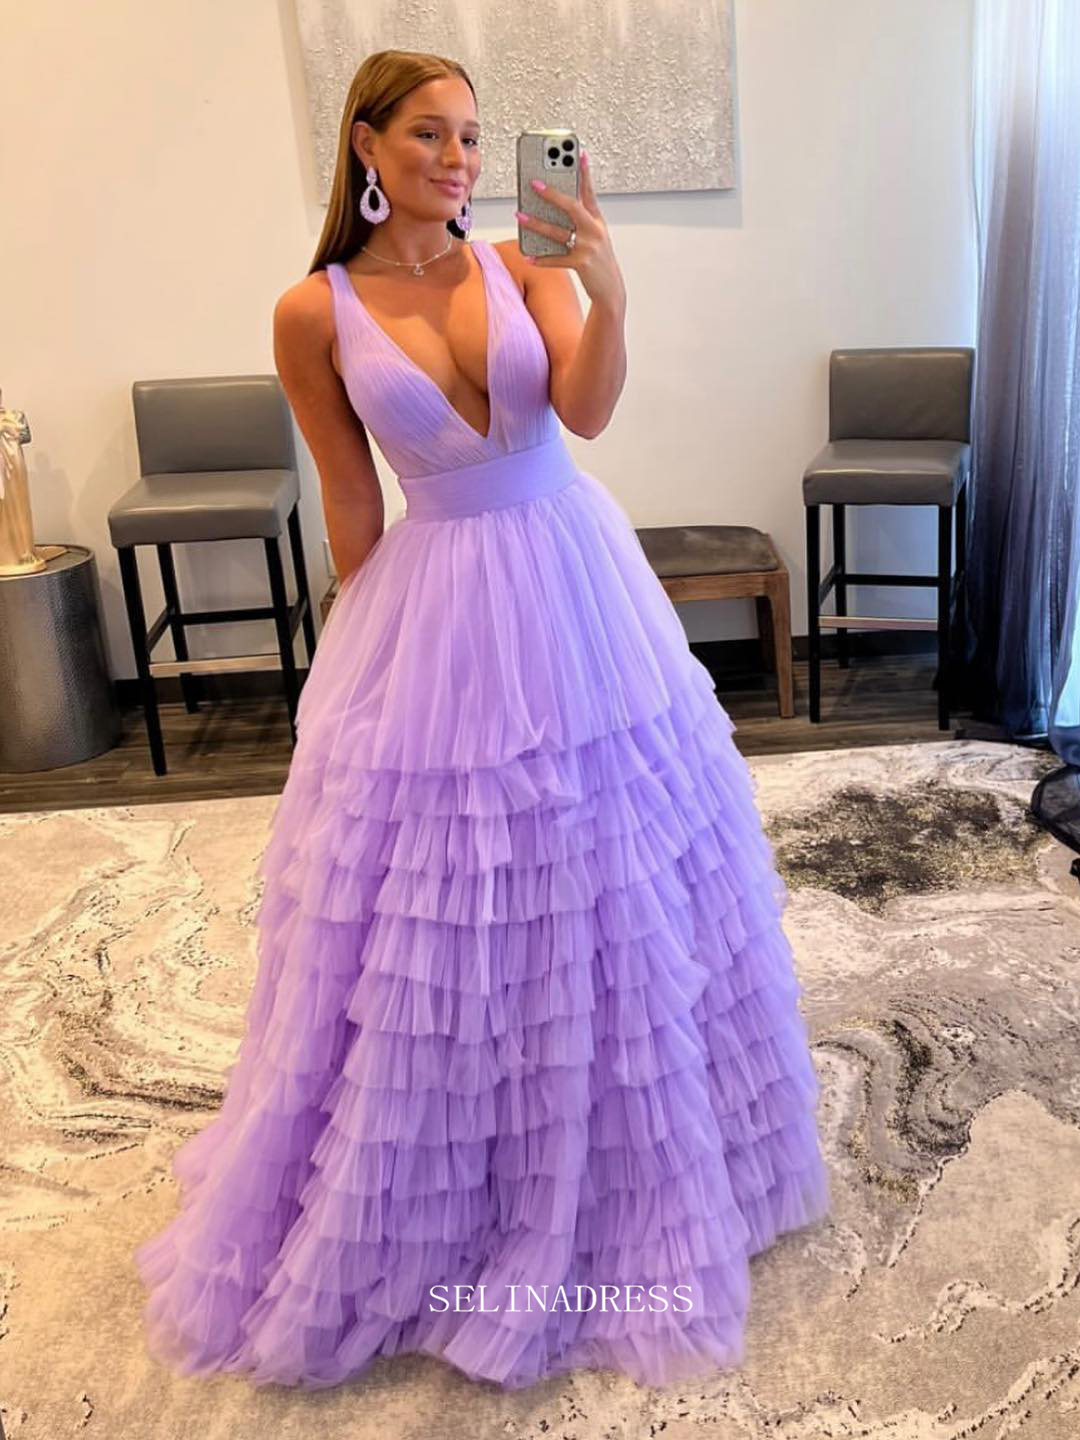 Chic A-line V neck Lilac Prom Dresses Tulle Long Evening Dress